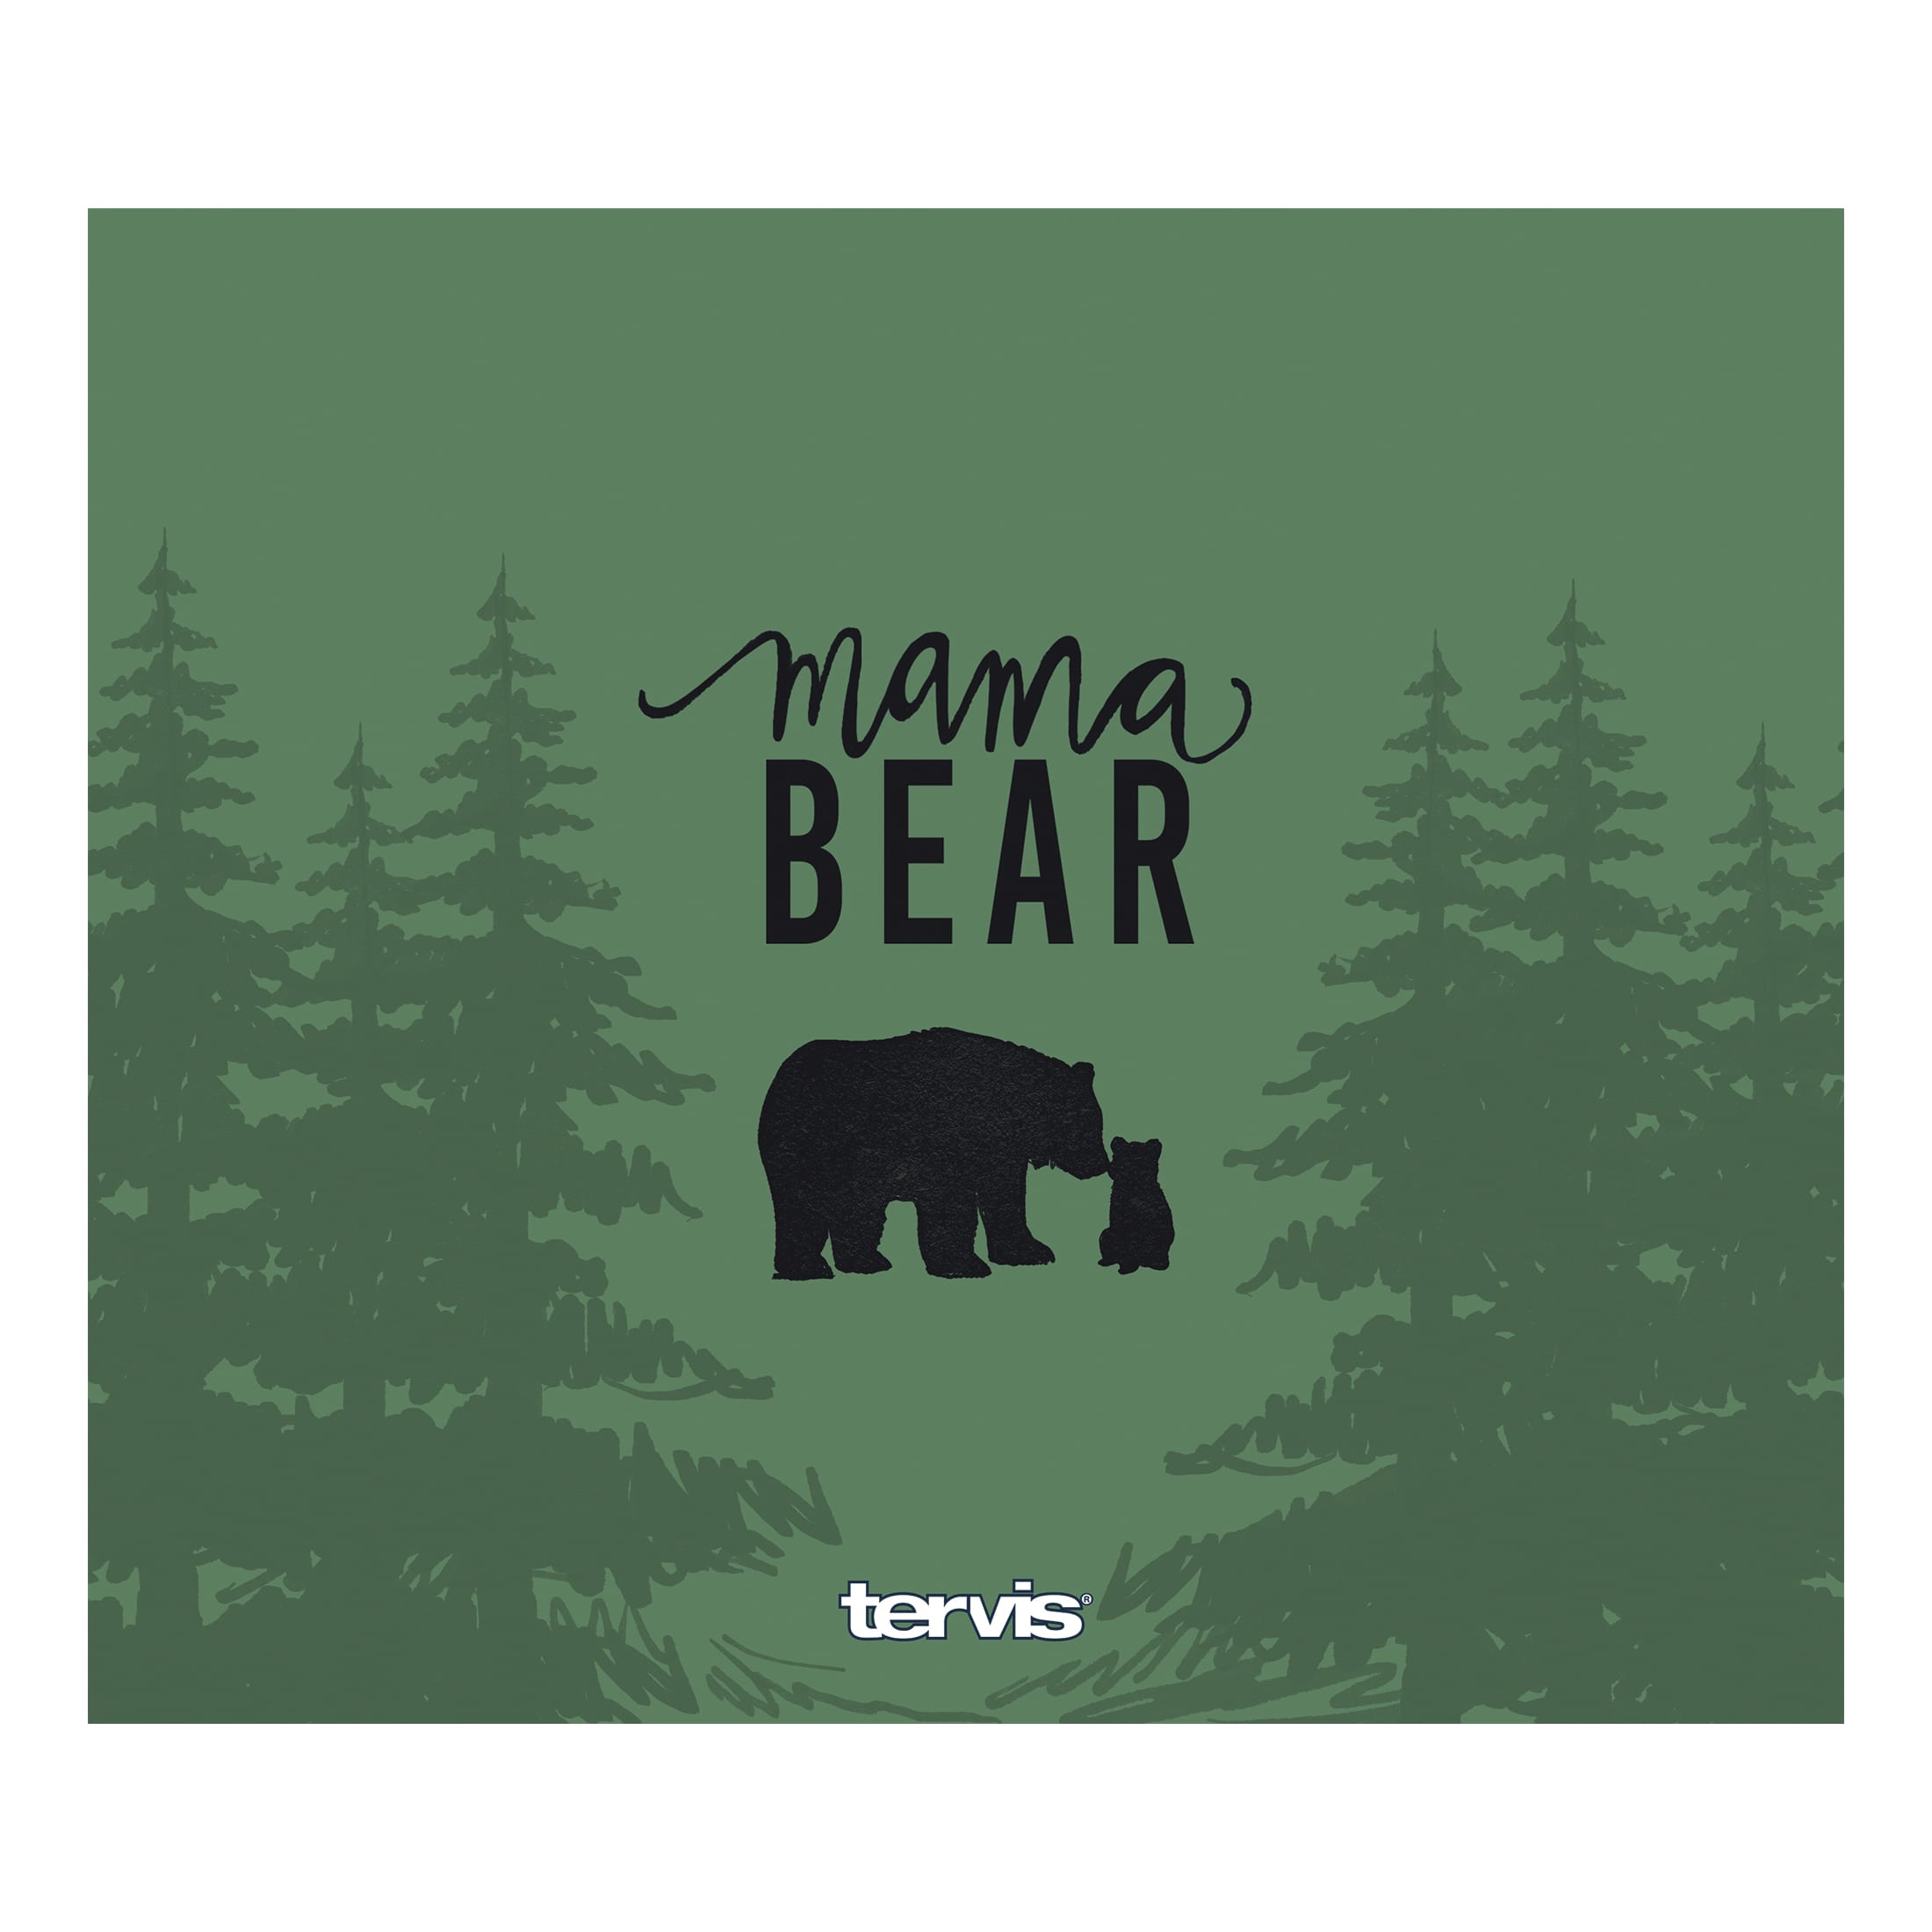 Tervis 24 oz. Wide Mouth Bottle - Mama Bear Forest